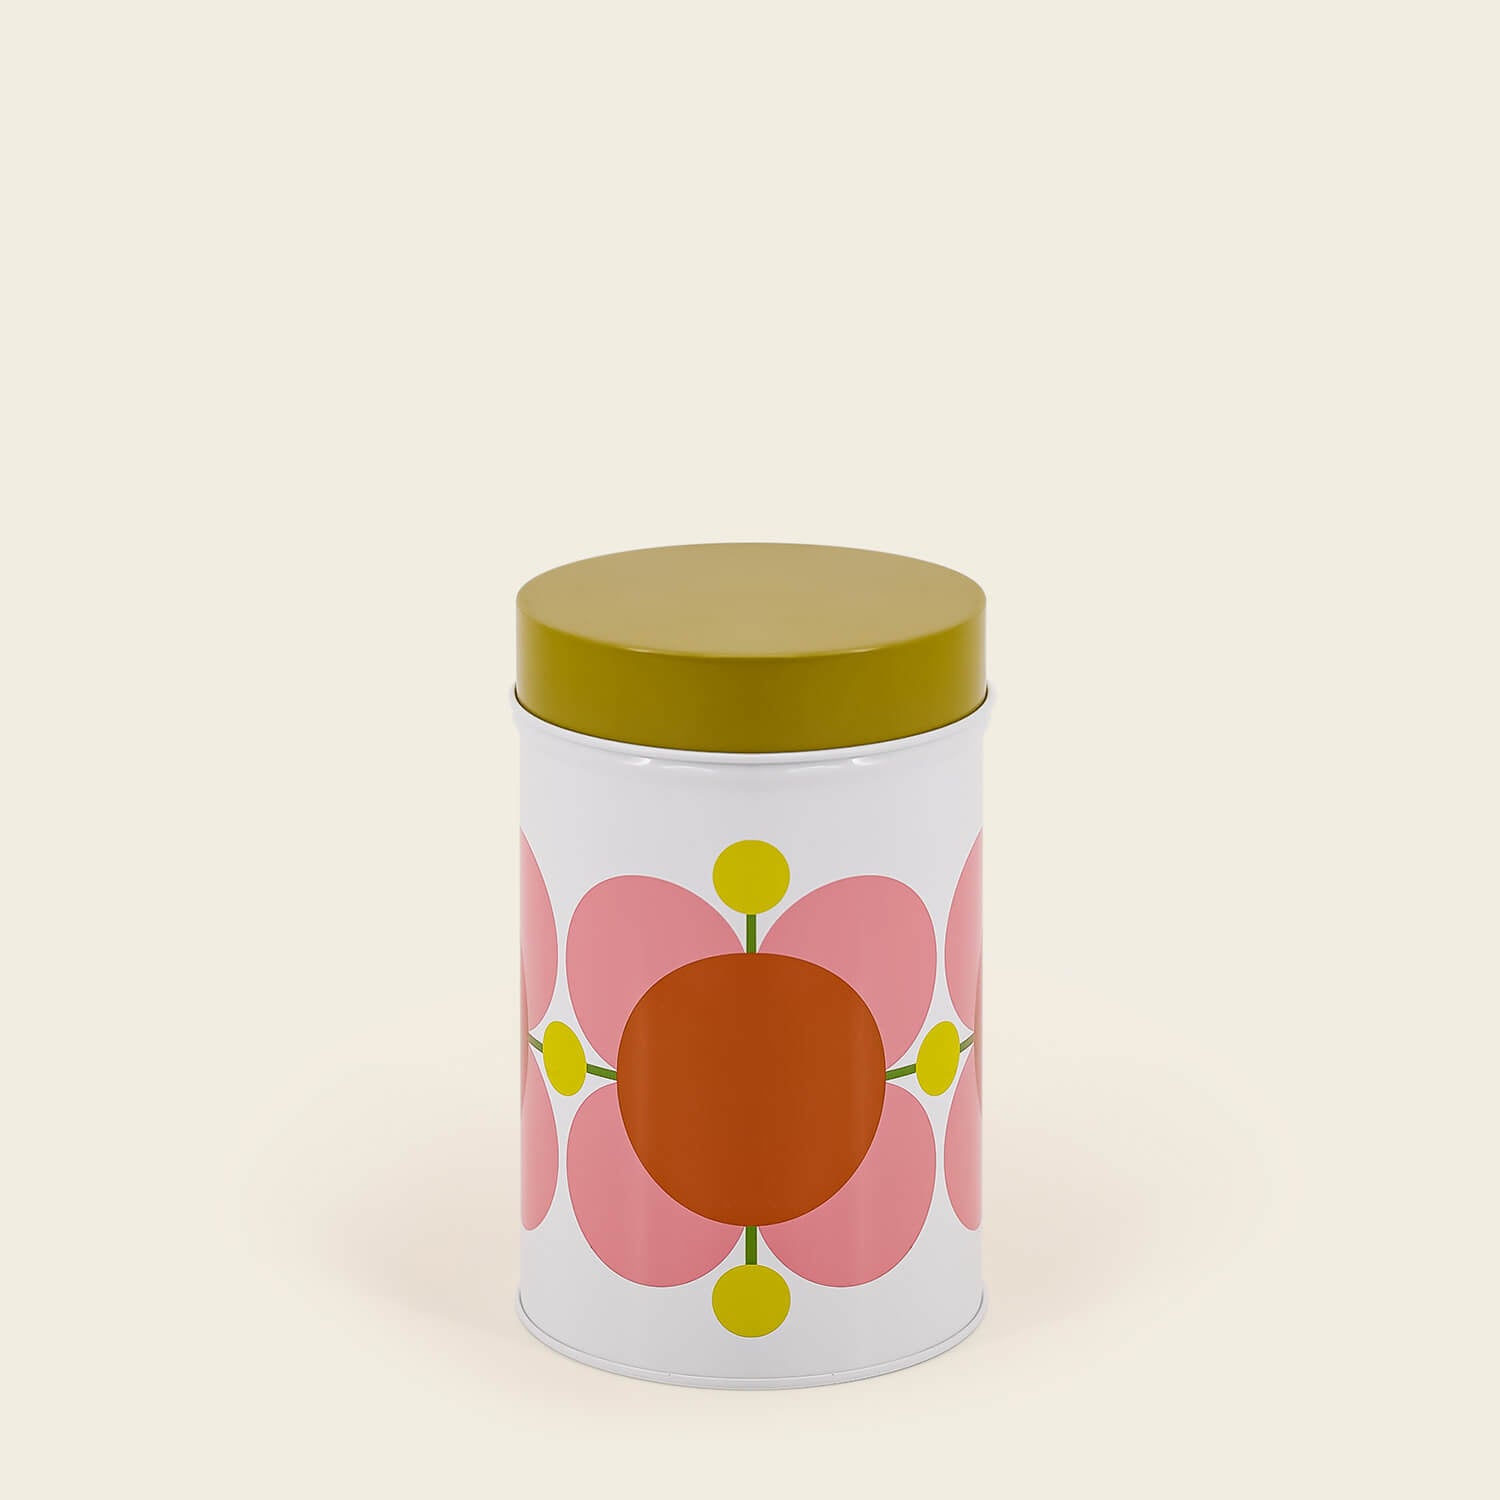 Orla Kiely Set of 3 Nesting Canister Tins - Atomic Flower 4 Shaws Department Stores